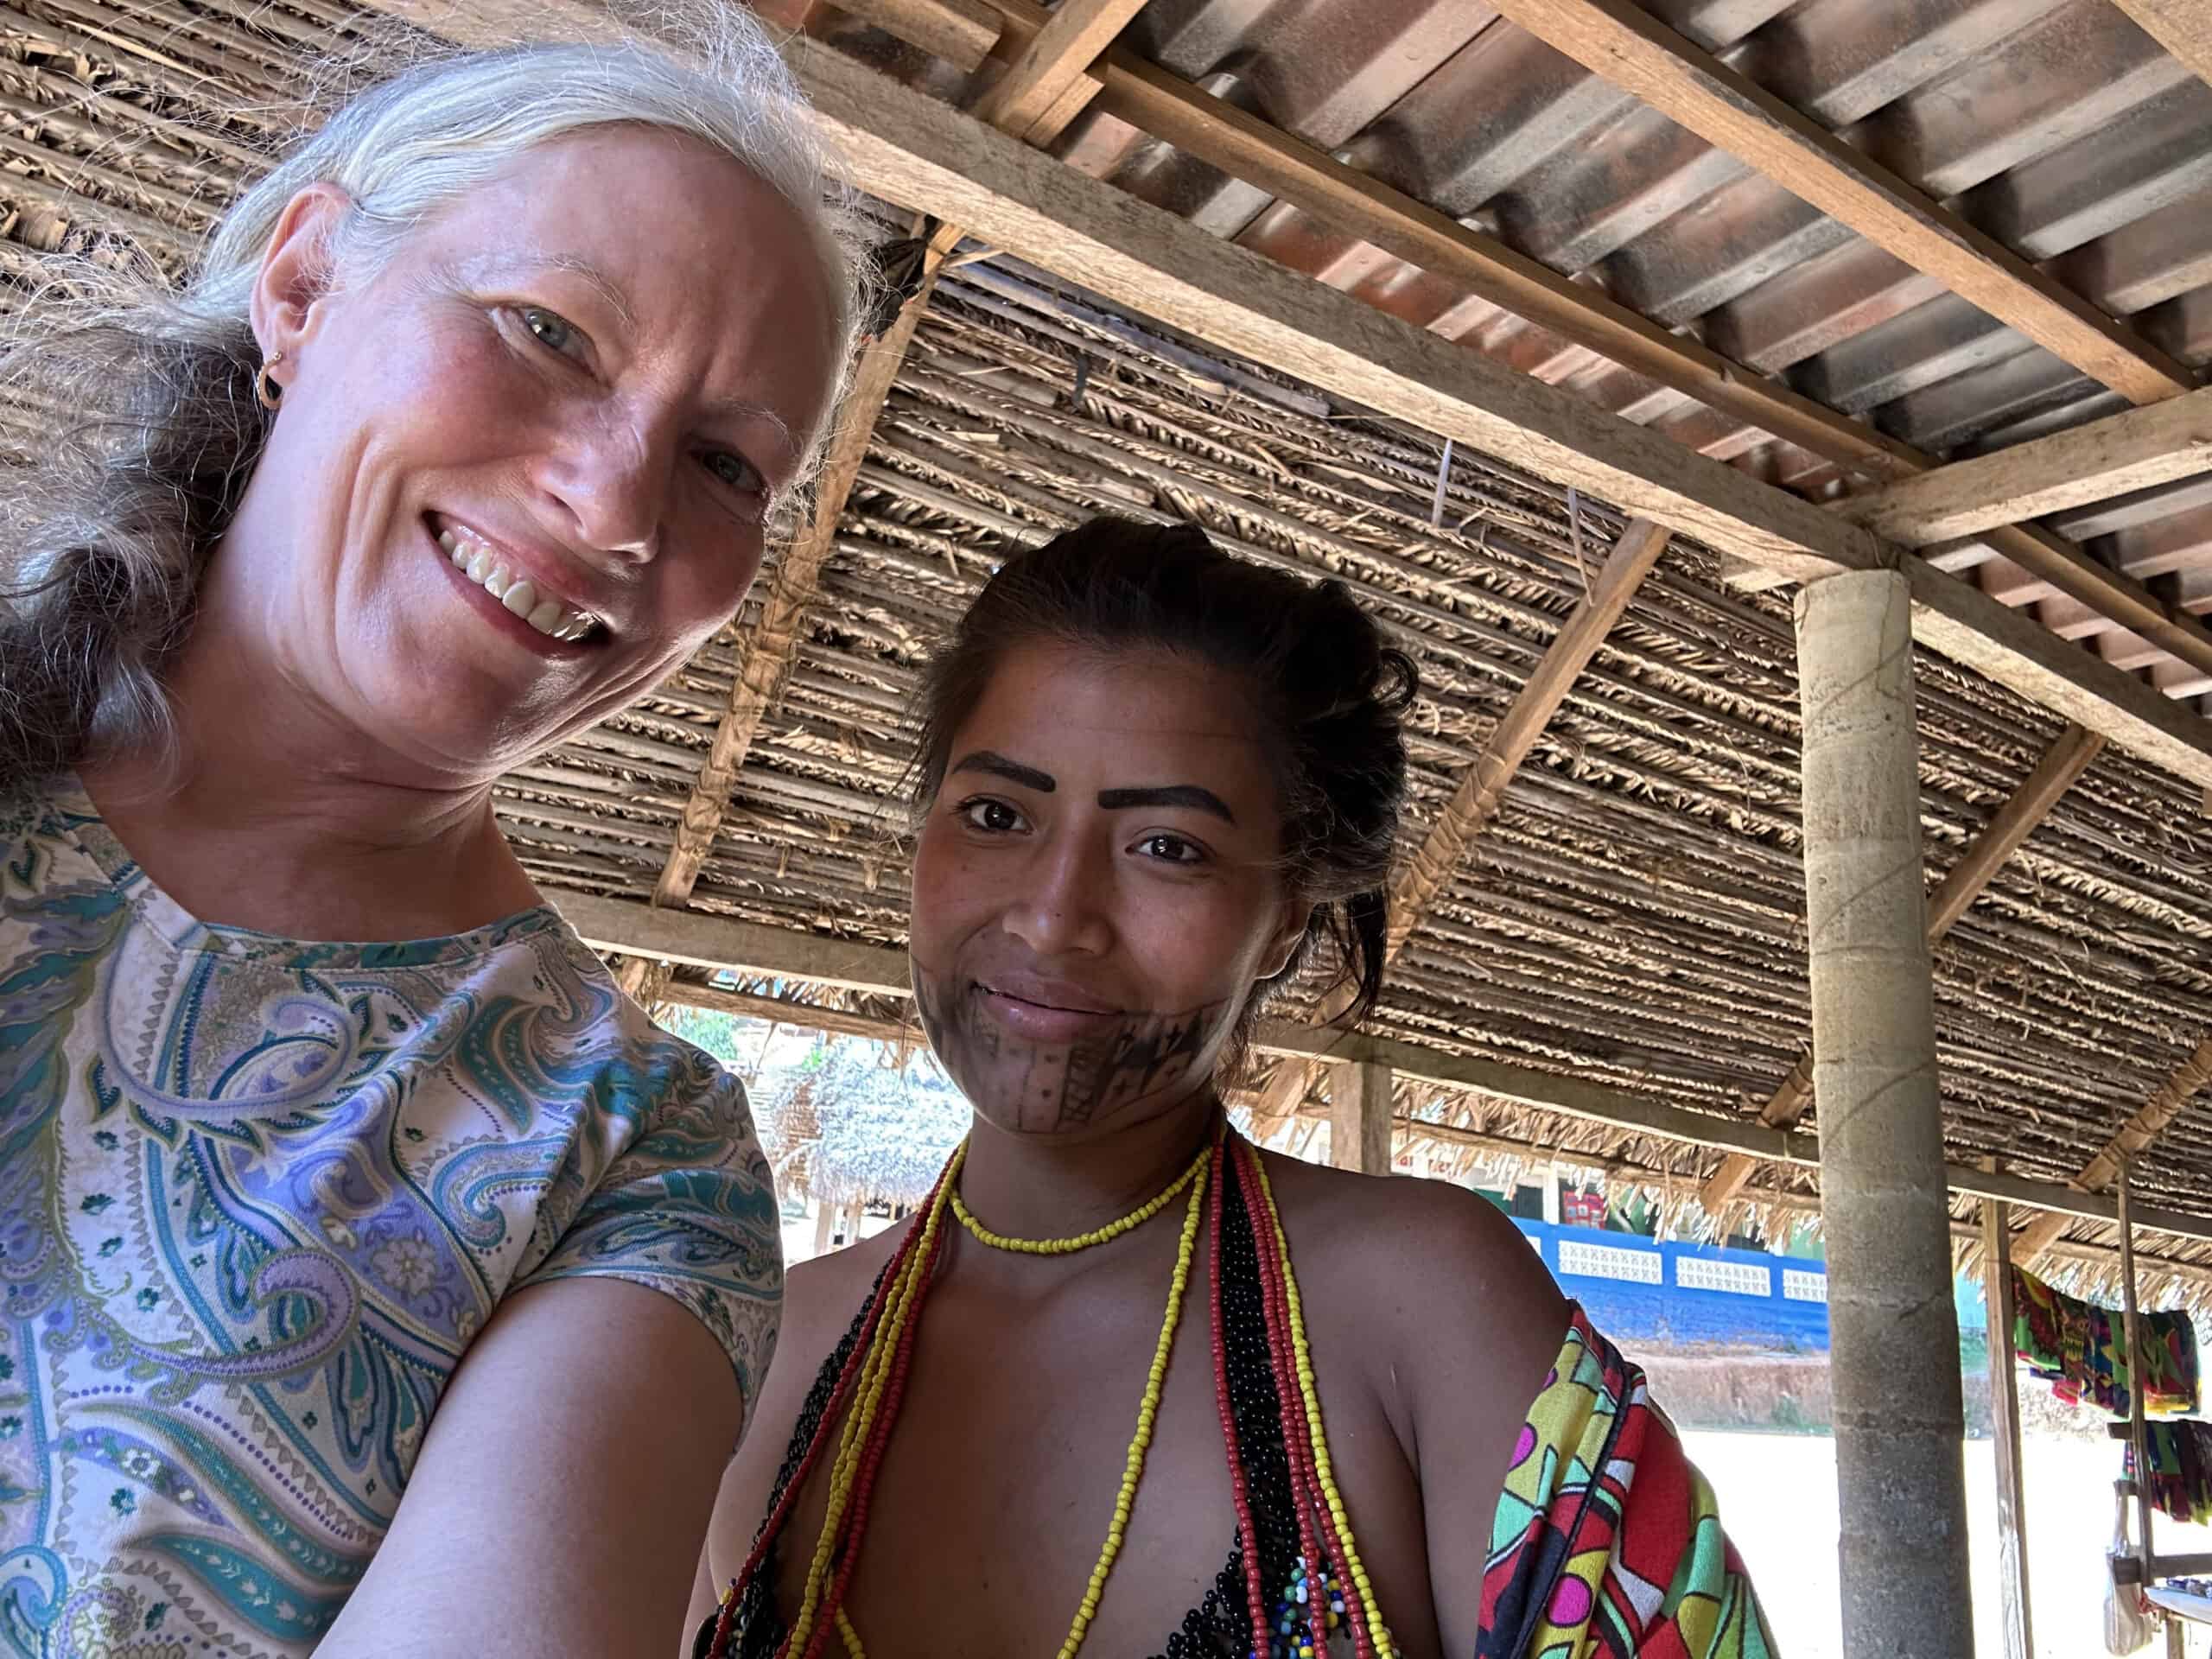 A North Way mission trip team member taking a selfie with a Panamanian woman.